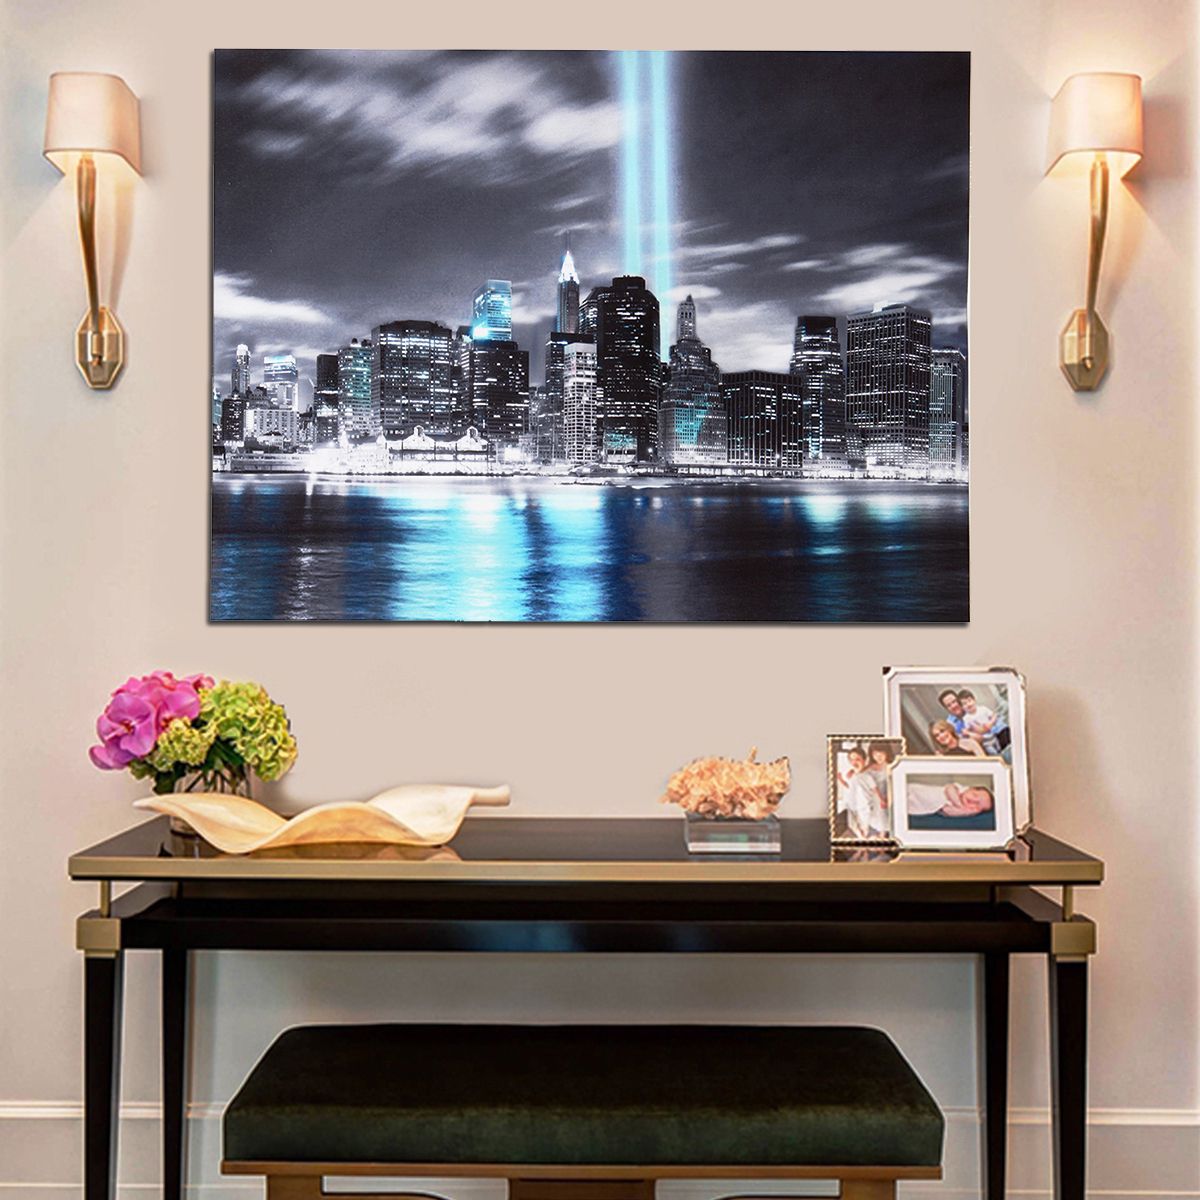 New York City Framed Art Prints With Fashionable 30''x40'' No Framed New York City Manhattan Skyline Canvas (View 3 of 20)